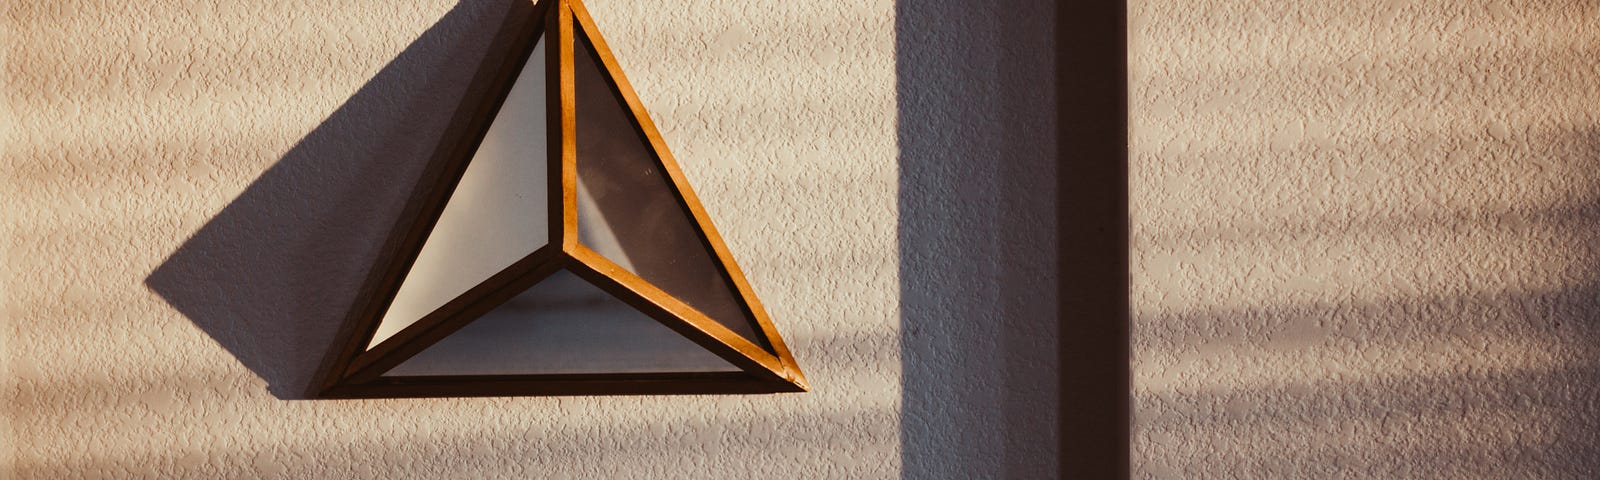 Image of a framed glass pyramid casting shadows on a textured background